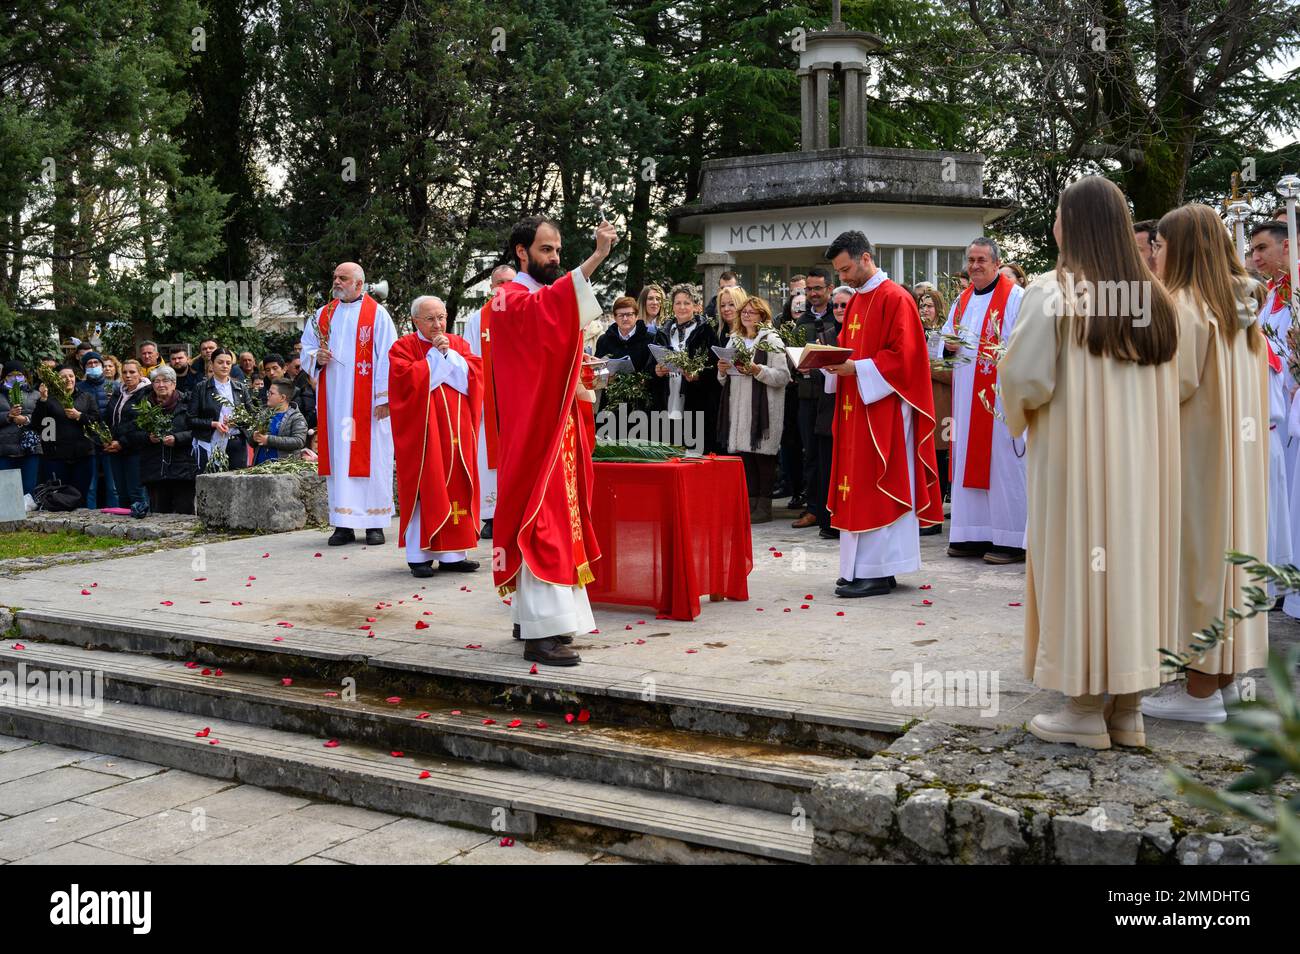 Blessing of the palms on Palm Sunday in Medjugorje, Bosnia and Herzegovina. Msgr. Aldo Cavalli, the Apostolic Visitor to Medjugorje, is also present. Stock Photo